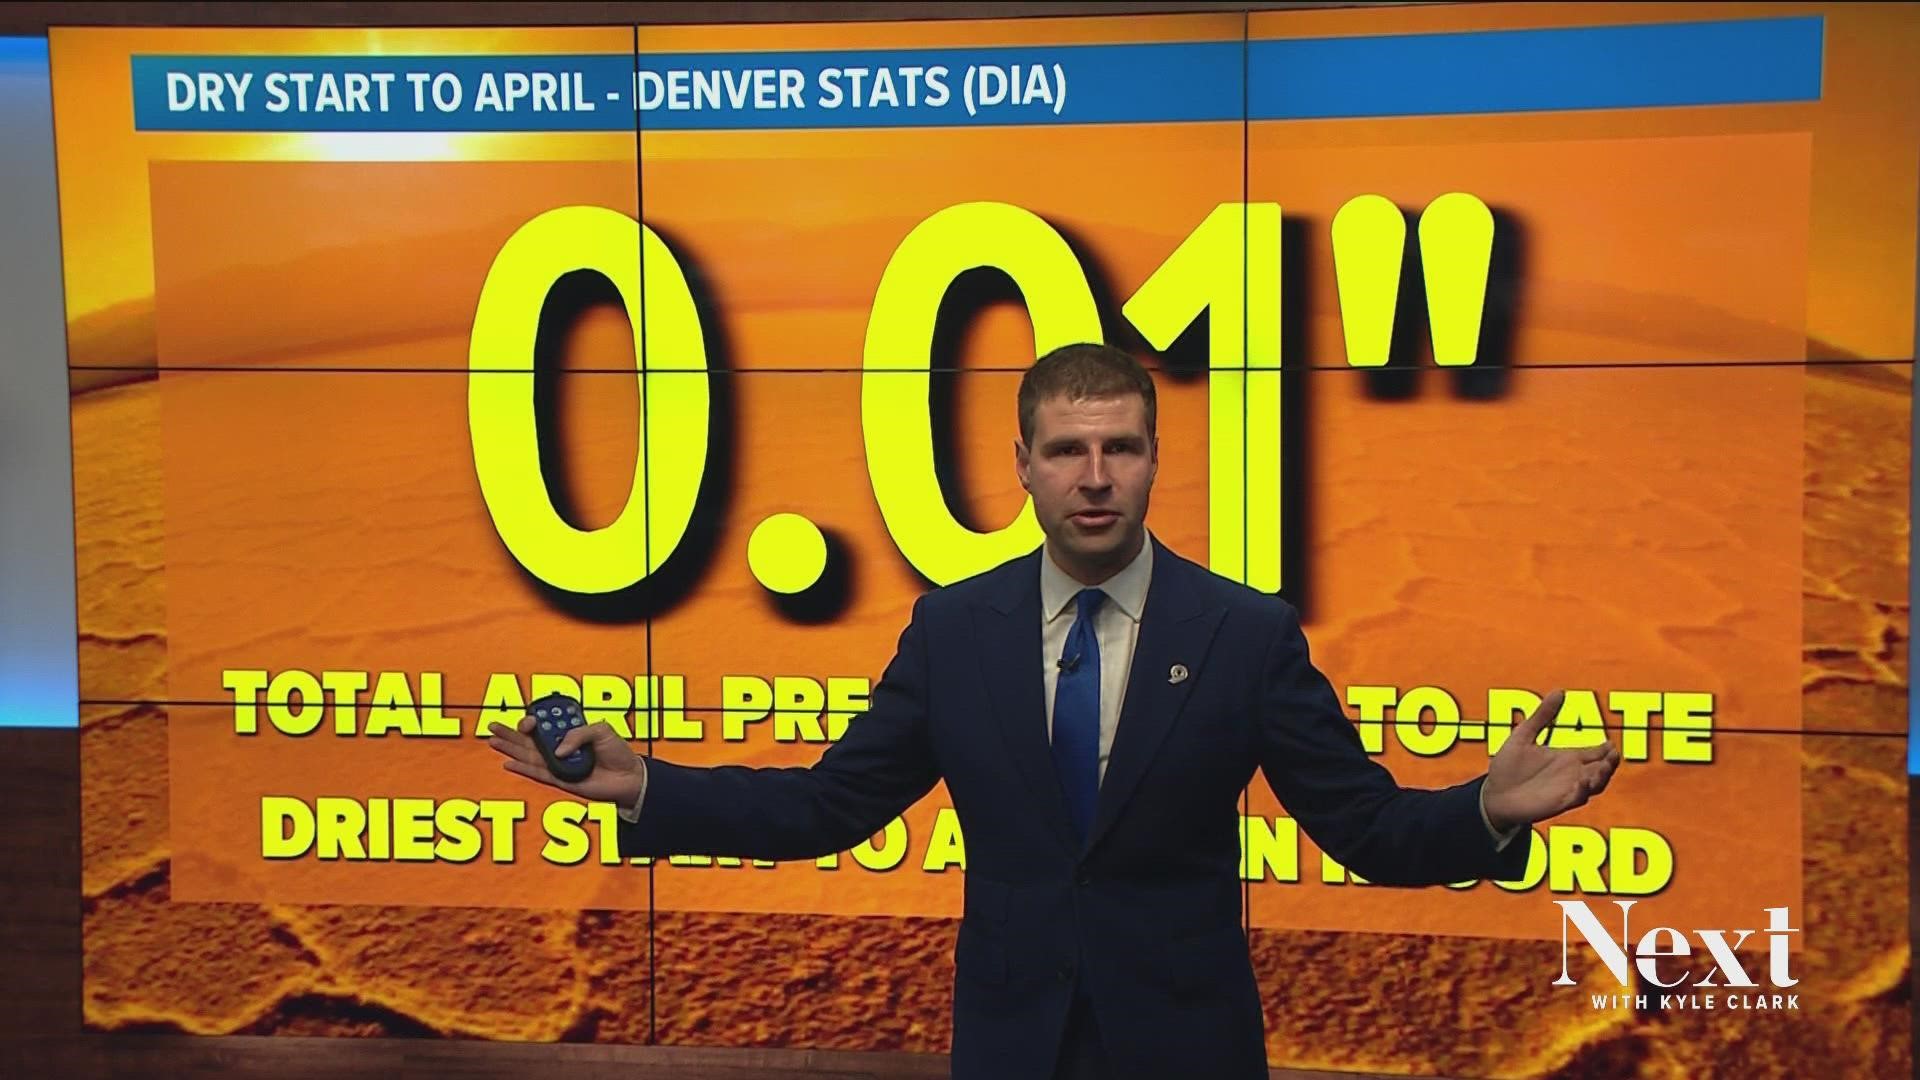 9NEWS meteorologist Chris Bianchi said extreme conditions are happening more often in Colorado.